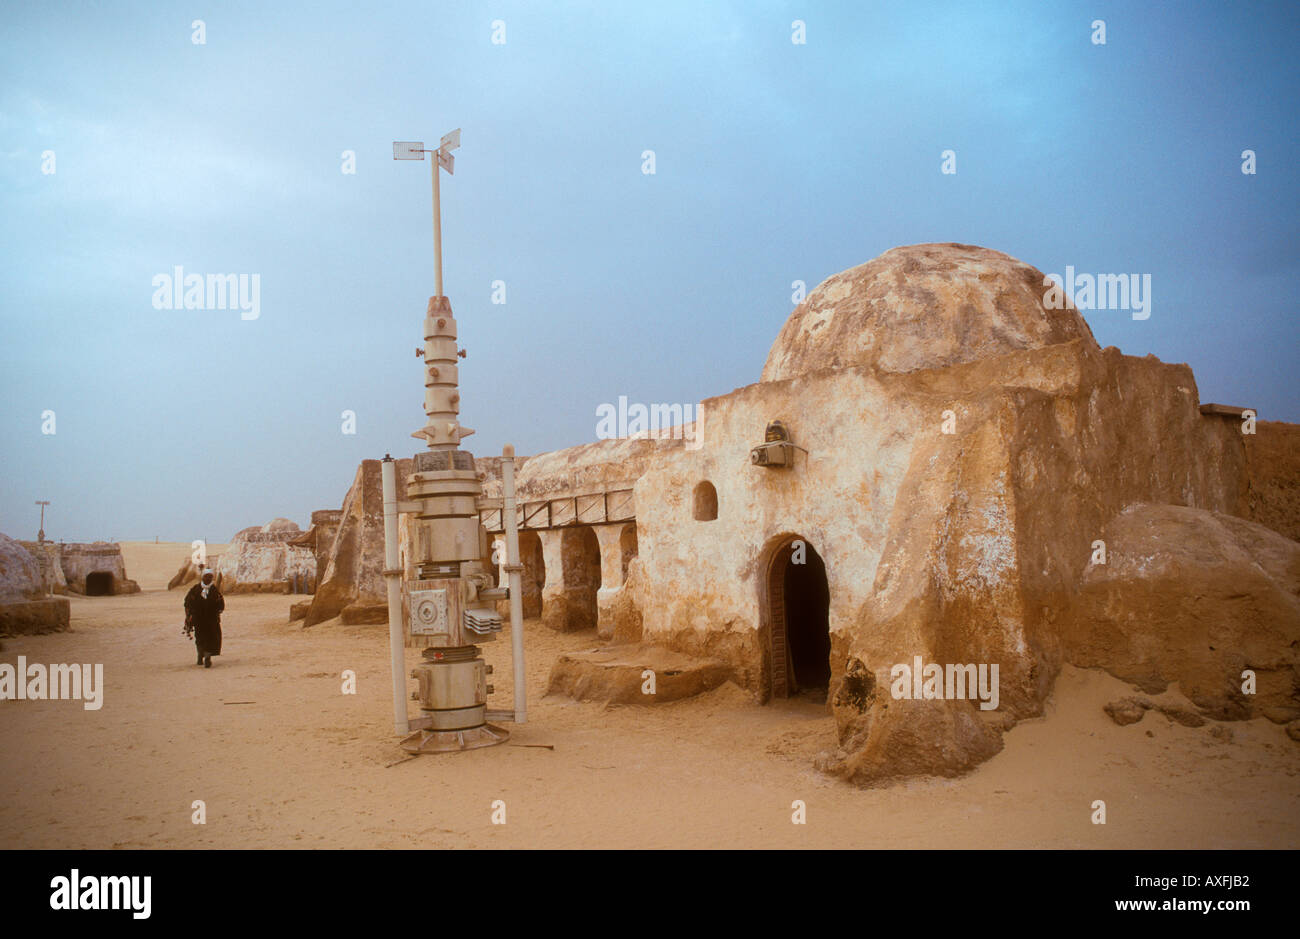 Arab man walking in the remains of the Star Wars set now a tourist attraction in the desert Tunisia Africa Stock Photo